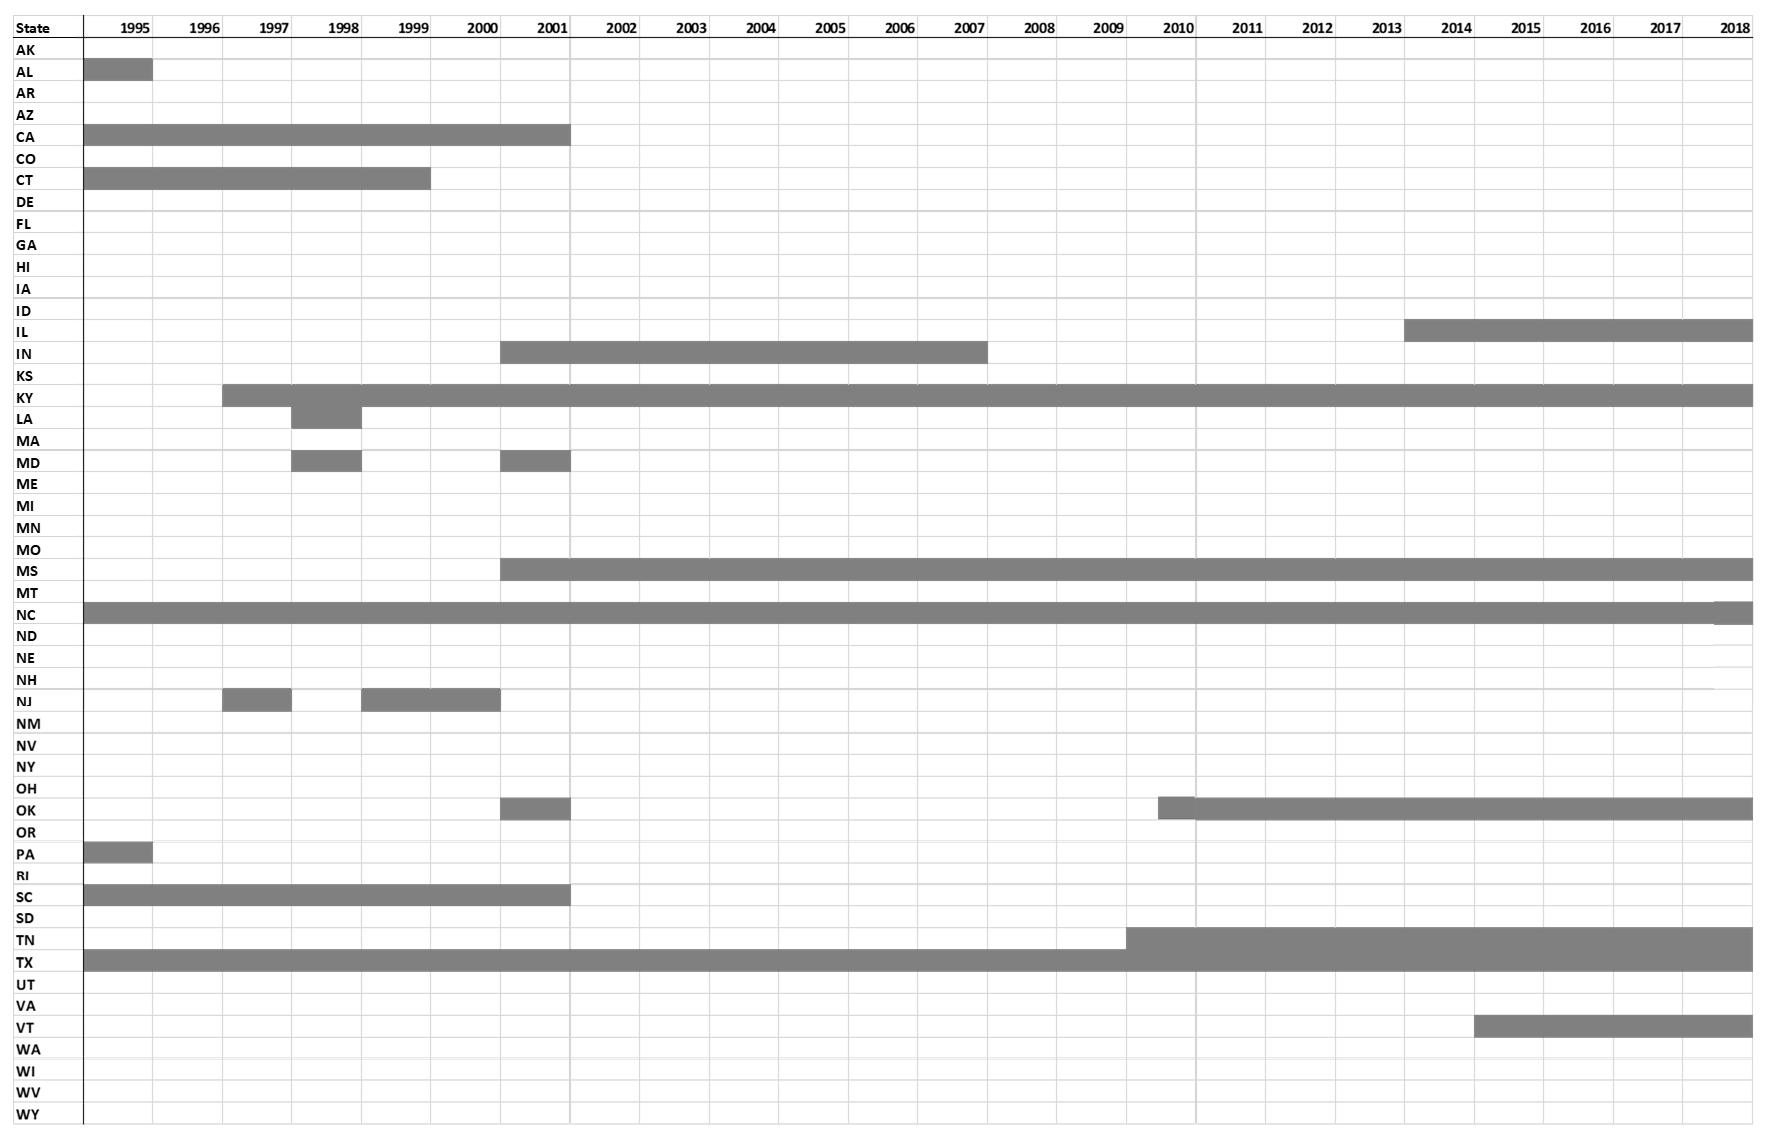 Gray shading table of reporting by state and year